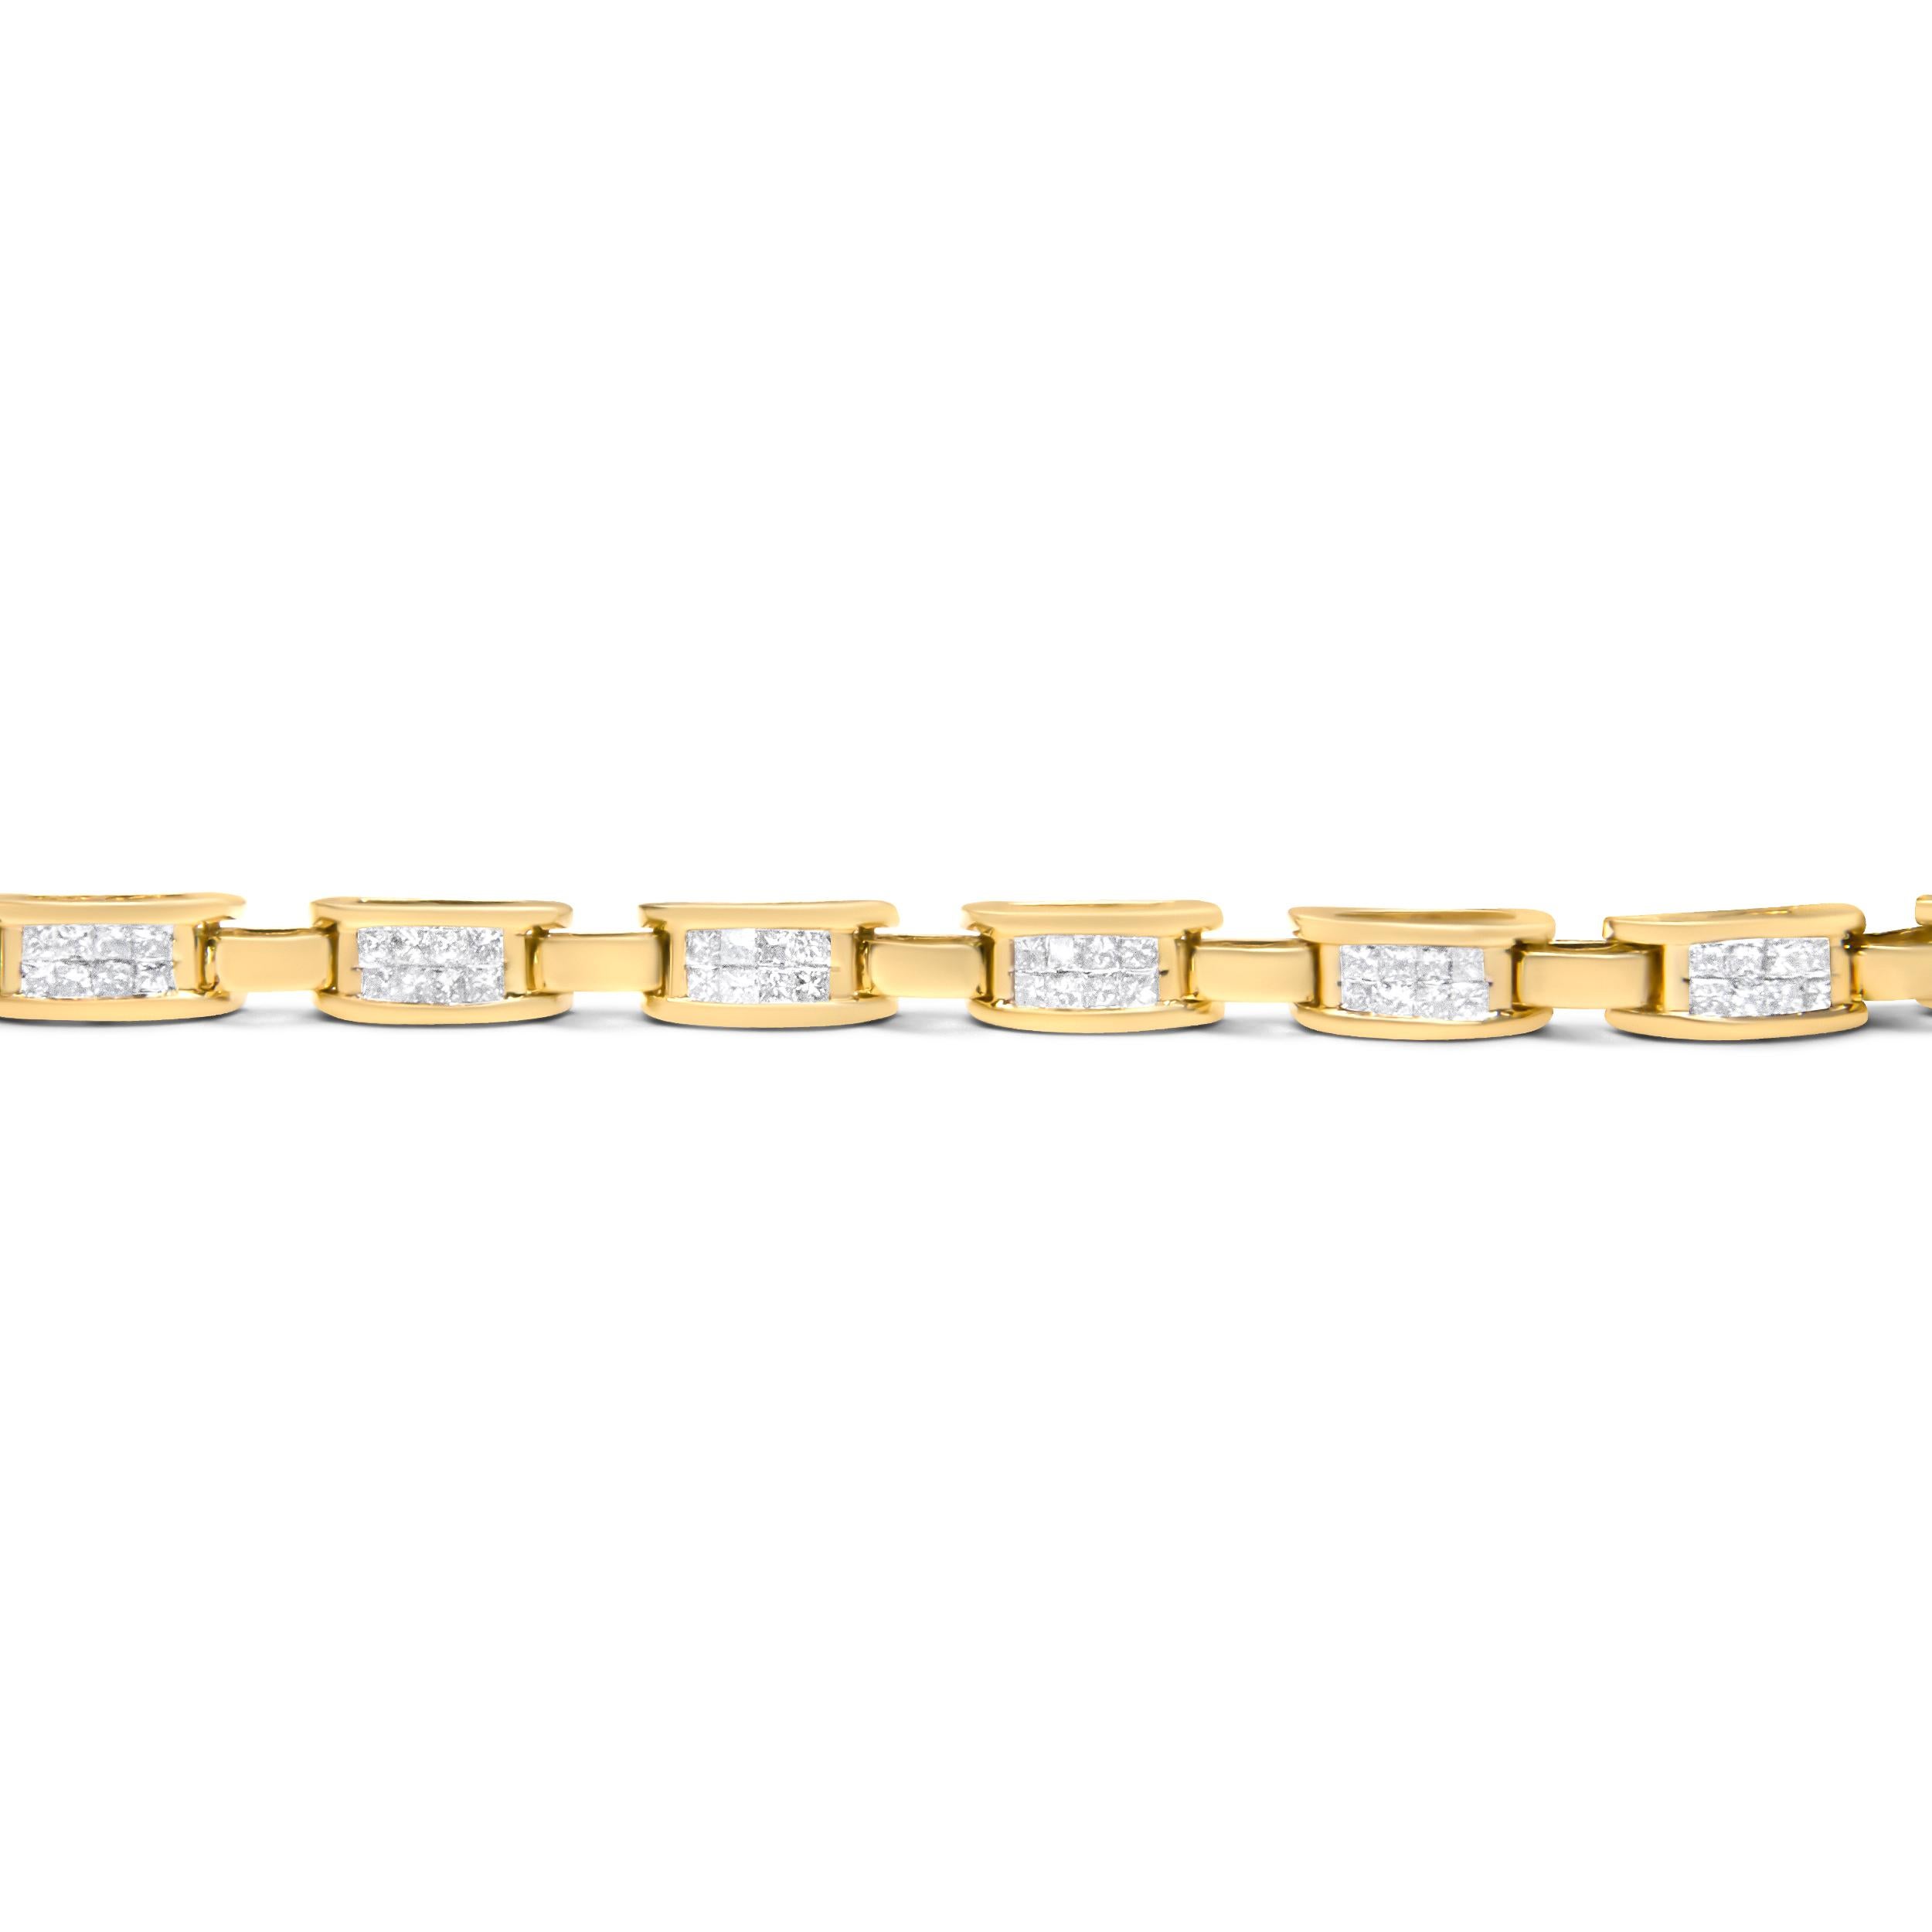 10K Yellow Gold 2.0 Carat Princess Cut Diamond Rectangular Link Bracelet In Fair Condition For Sale In New York, NY